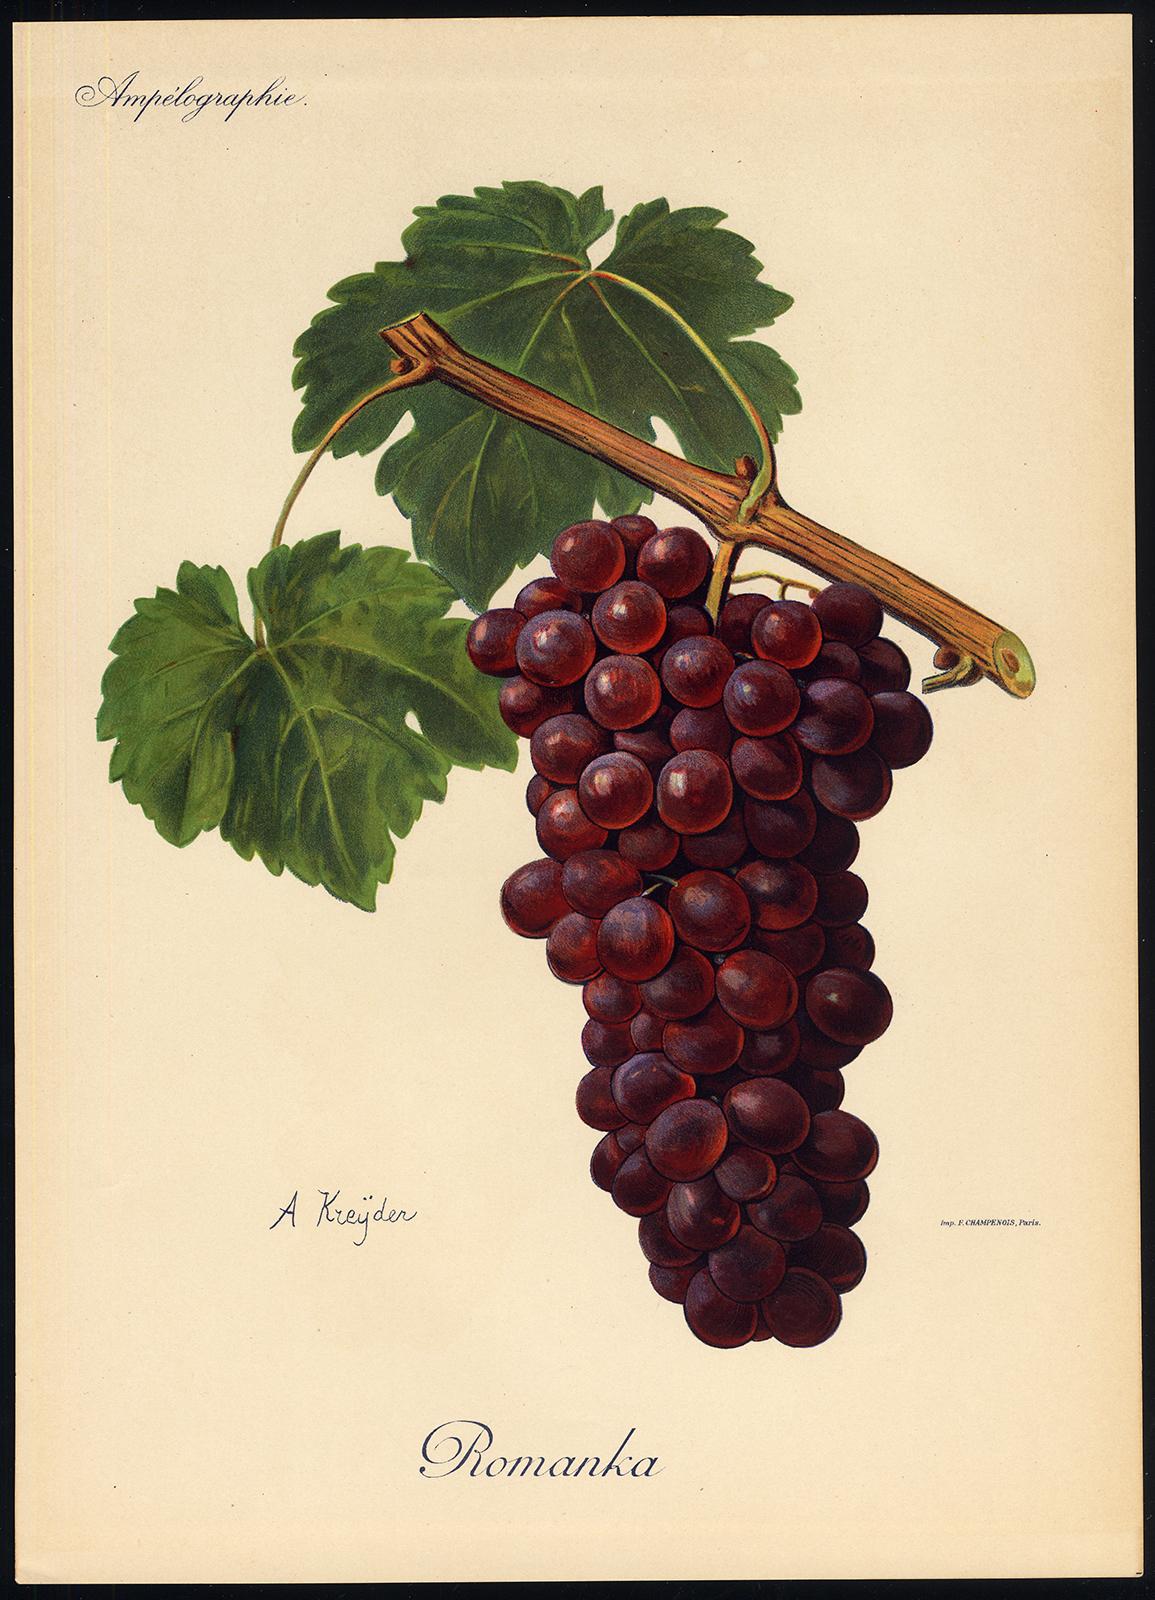 The Romanka grape - from Ampelography by Vermorel - Lithograph - Early 20th c. - Print by Victor Vermorel